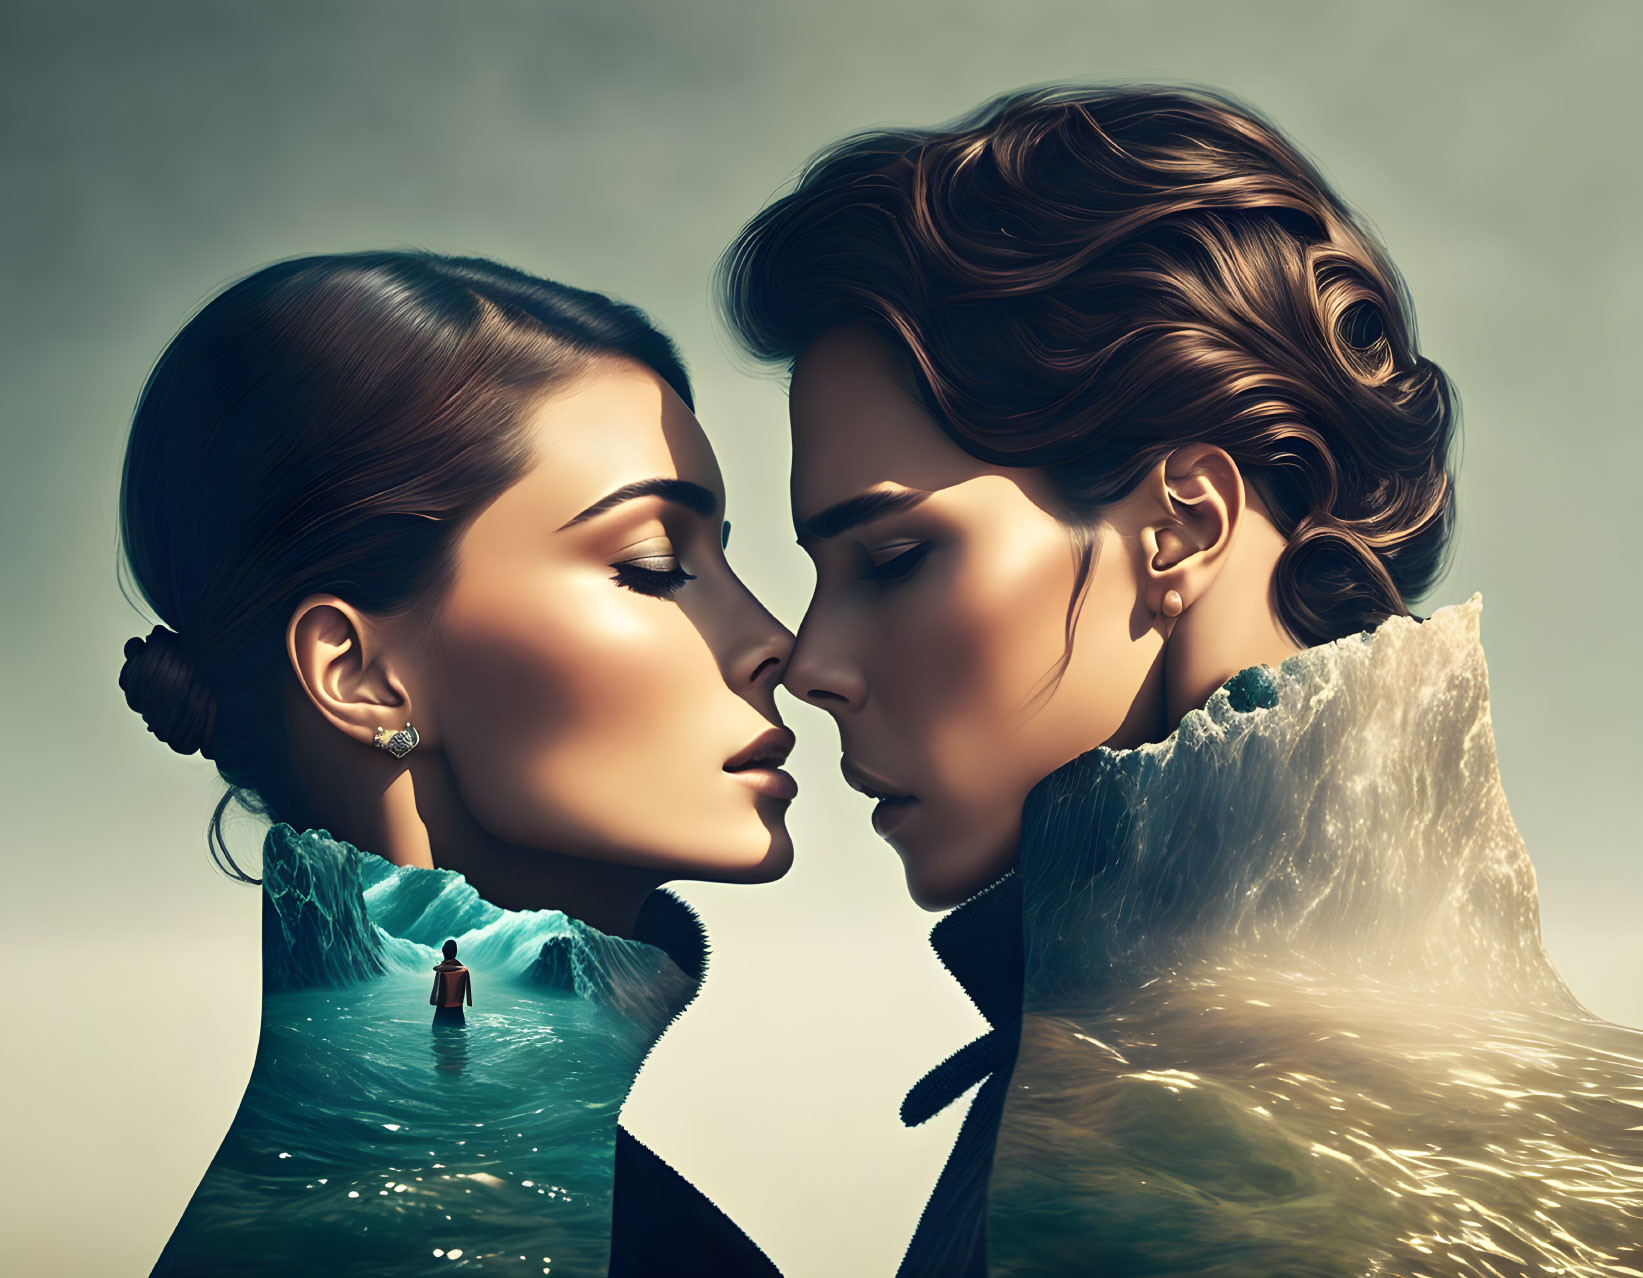 Stylized portraits merging into ocean landscapes with lighthouse.